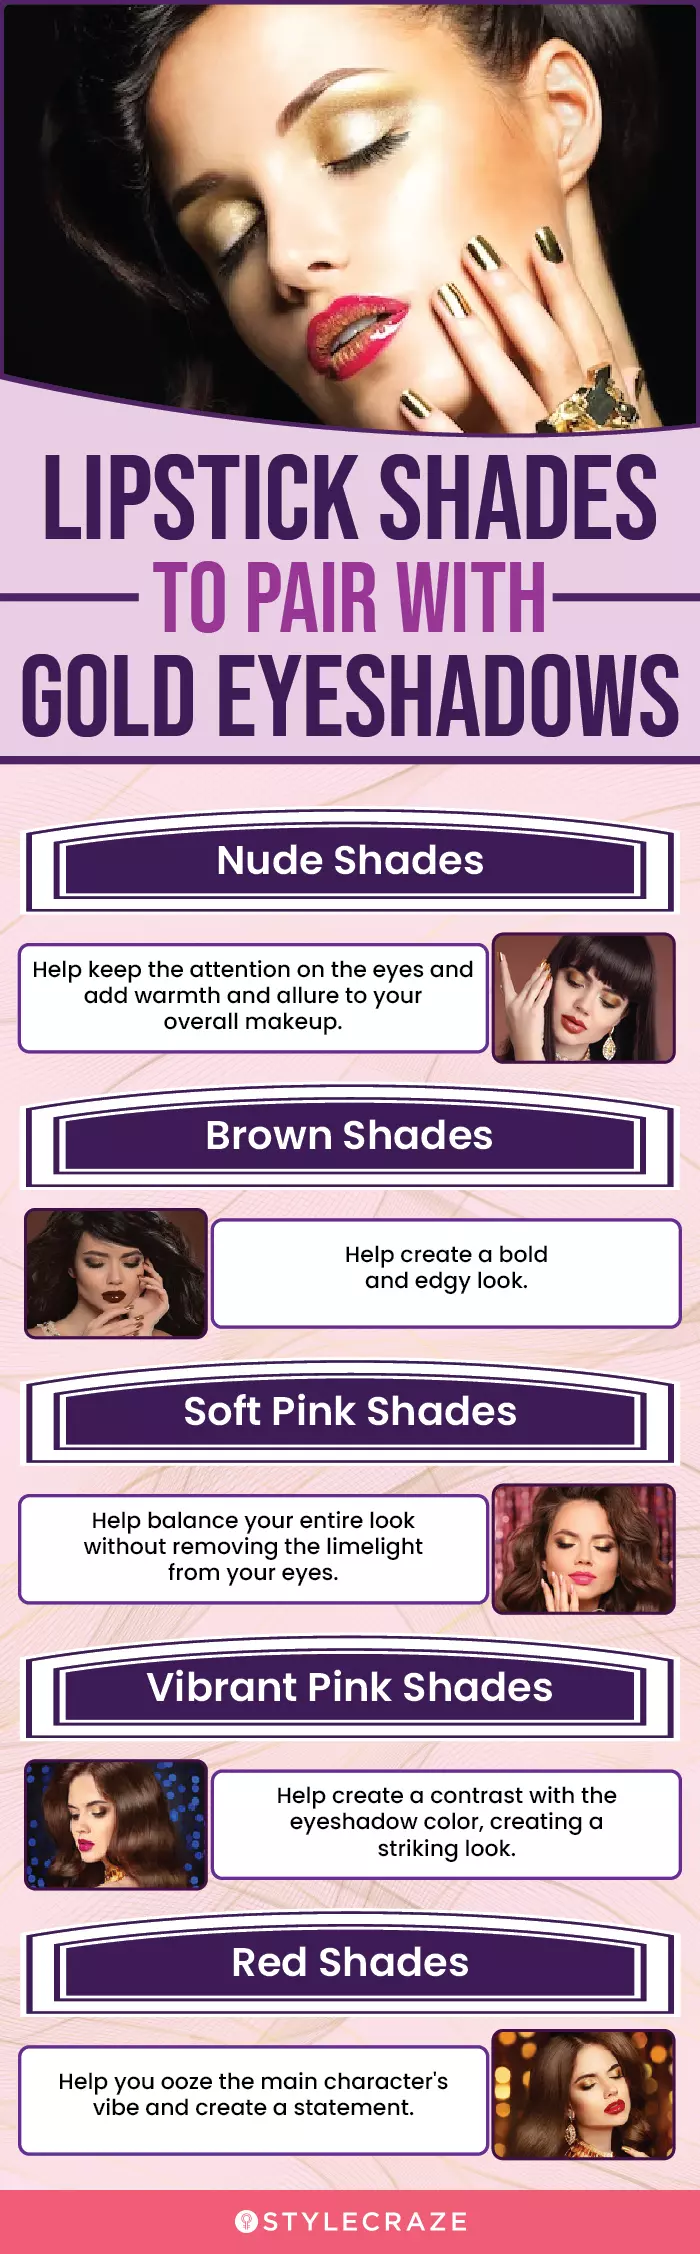 Lipstick Shades To Pair With Gold Eyeshadows (infographic)